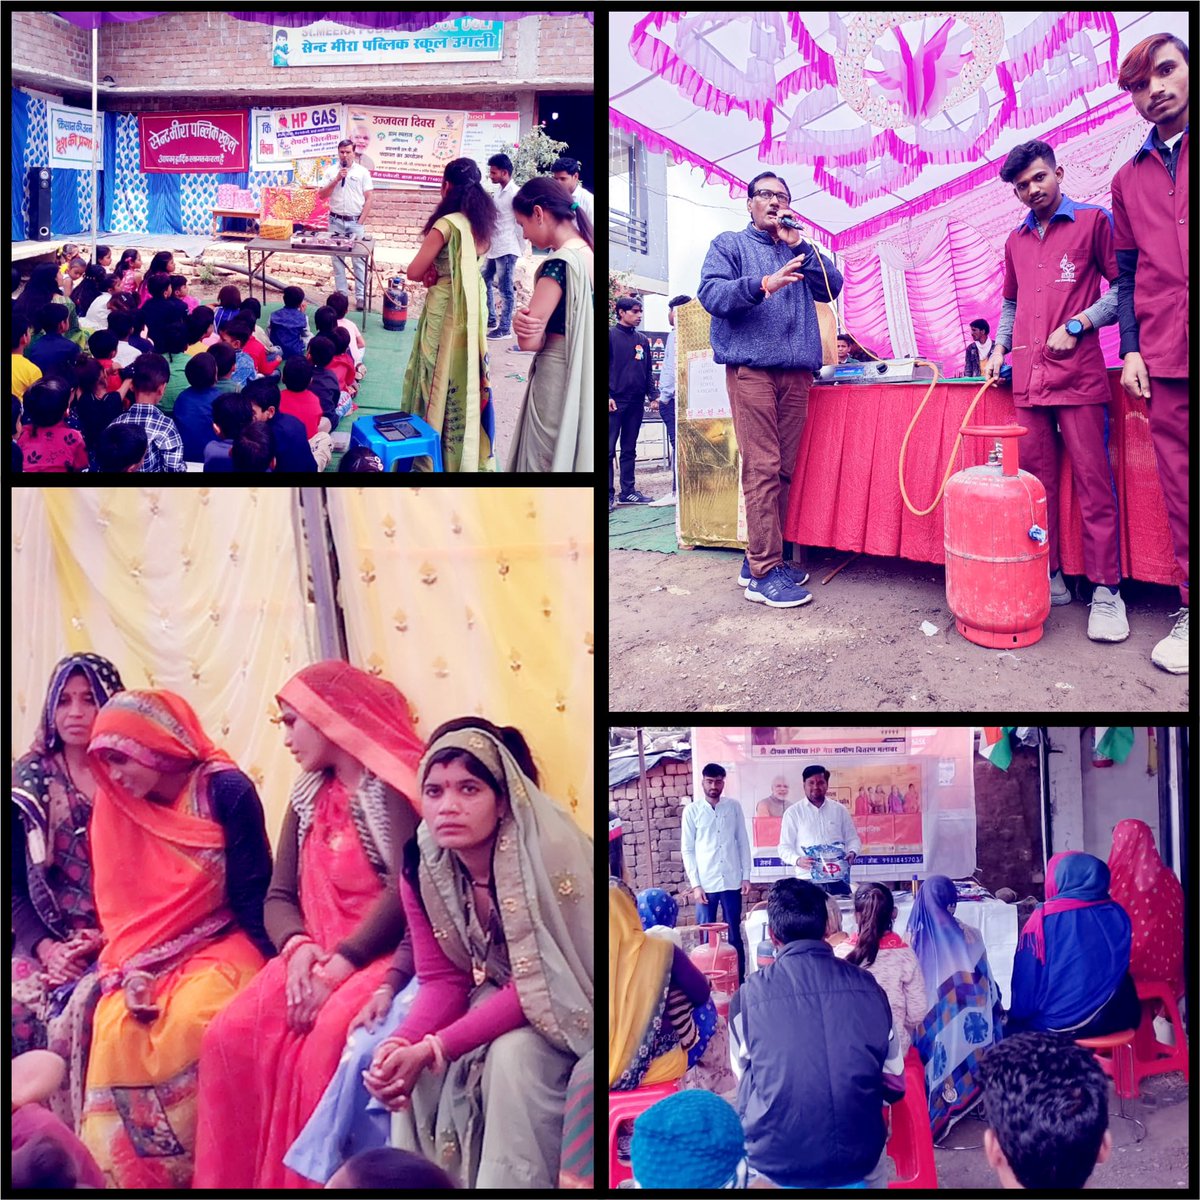 HPCL Ujjain SA always focus on SafetyFirst for our valued customer. Today LPG Panchayat was conducted by all the Distributors in their respective villages for all the consumers.We educated our customer on safe usage of LPG and benefit in their life. @nalli_srinivas @NwzLpg @HPCL